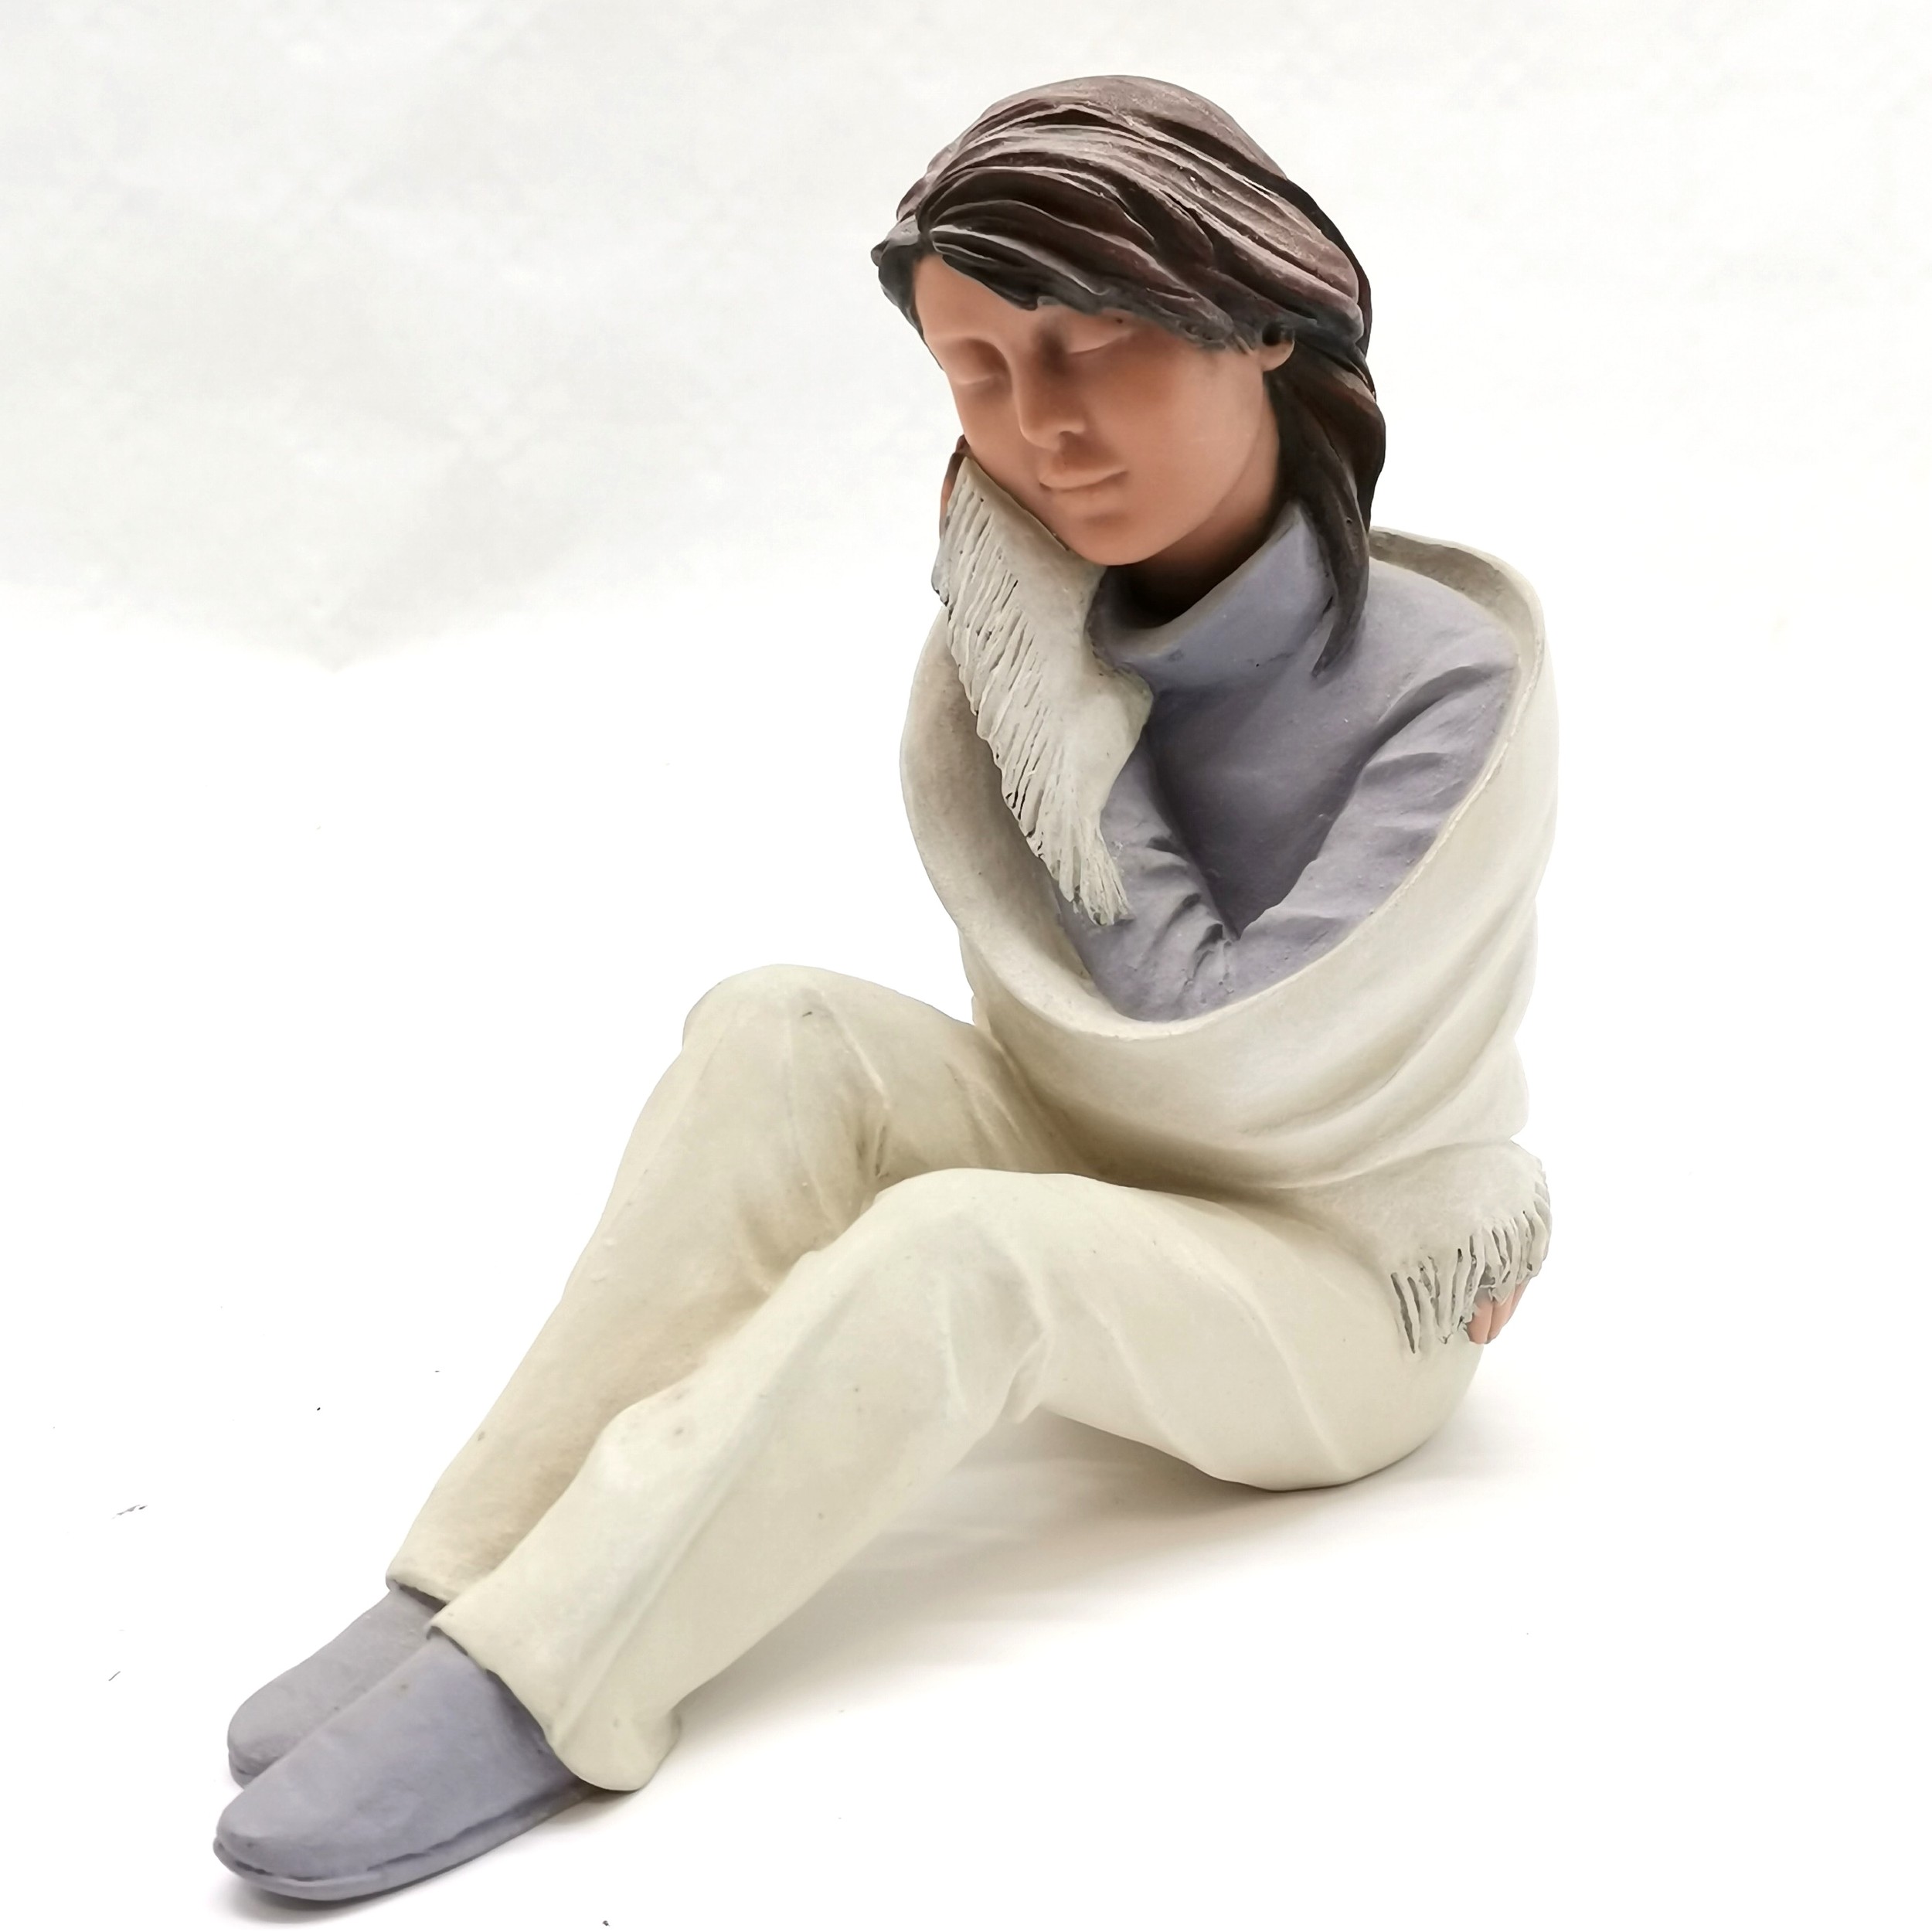 Elisa figurine 90599 El Tacto (the touch) from a limited edition of 5000 - 16.5cm high and with - Image 2 of 4